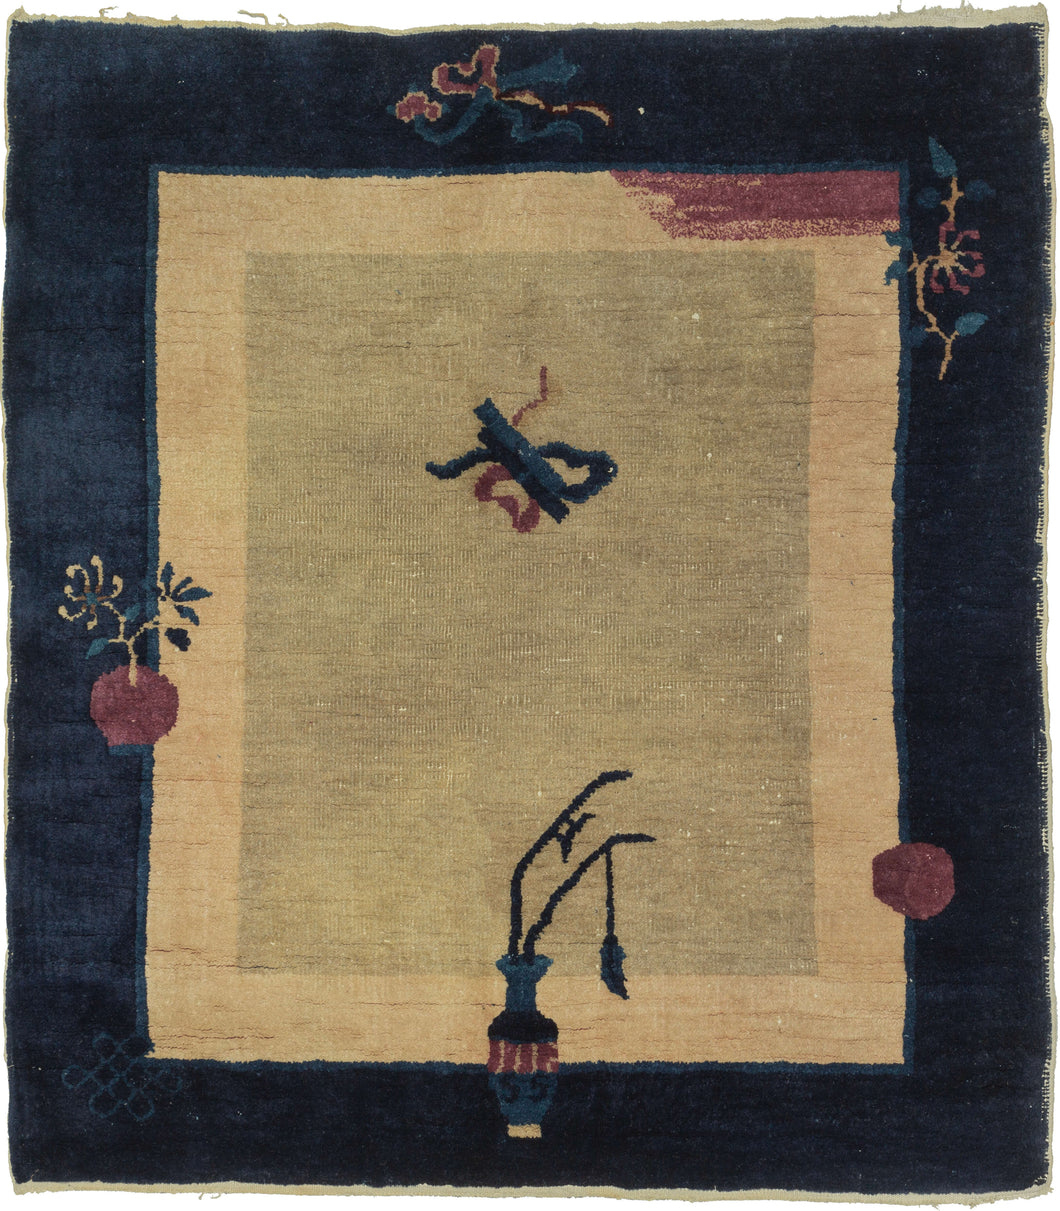 Small Ornamental Chinese Deco features an open celadon field framed by a small cream border and a wider navy border. Sparsely ornamented with a flower-filled vase, flowering branches, an orb, an eternal knot, and an interesting patch of purple that is reminiscent of a single broad brushstroke in the top right corner. Simple and straightforward with an auspicious vibe.